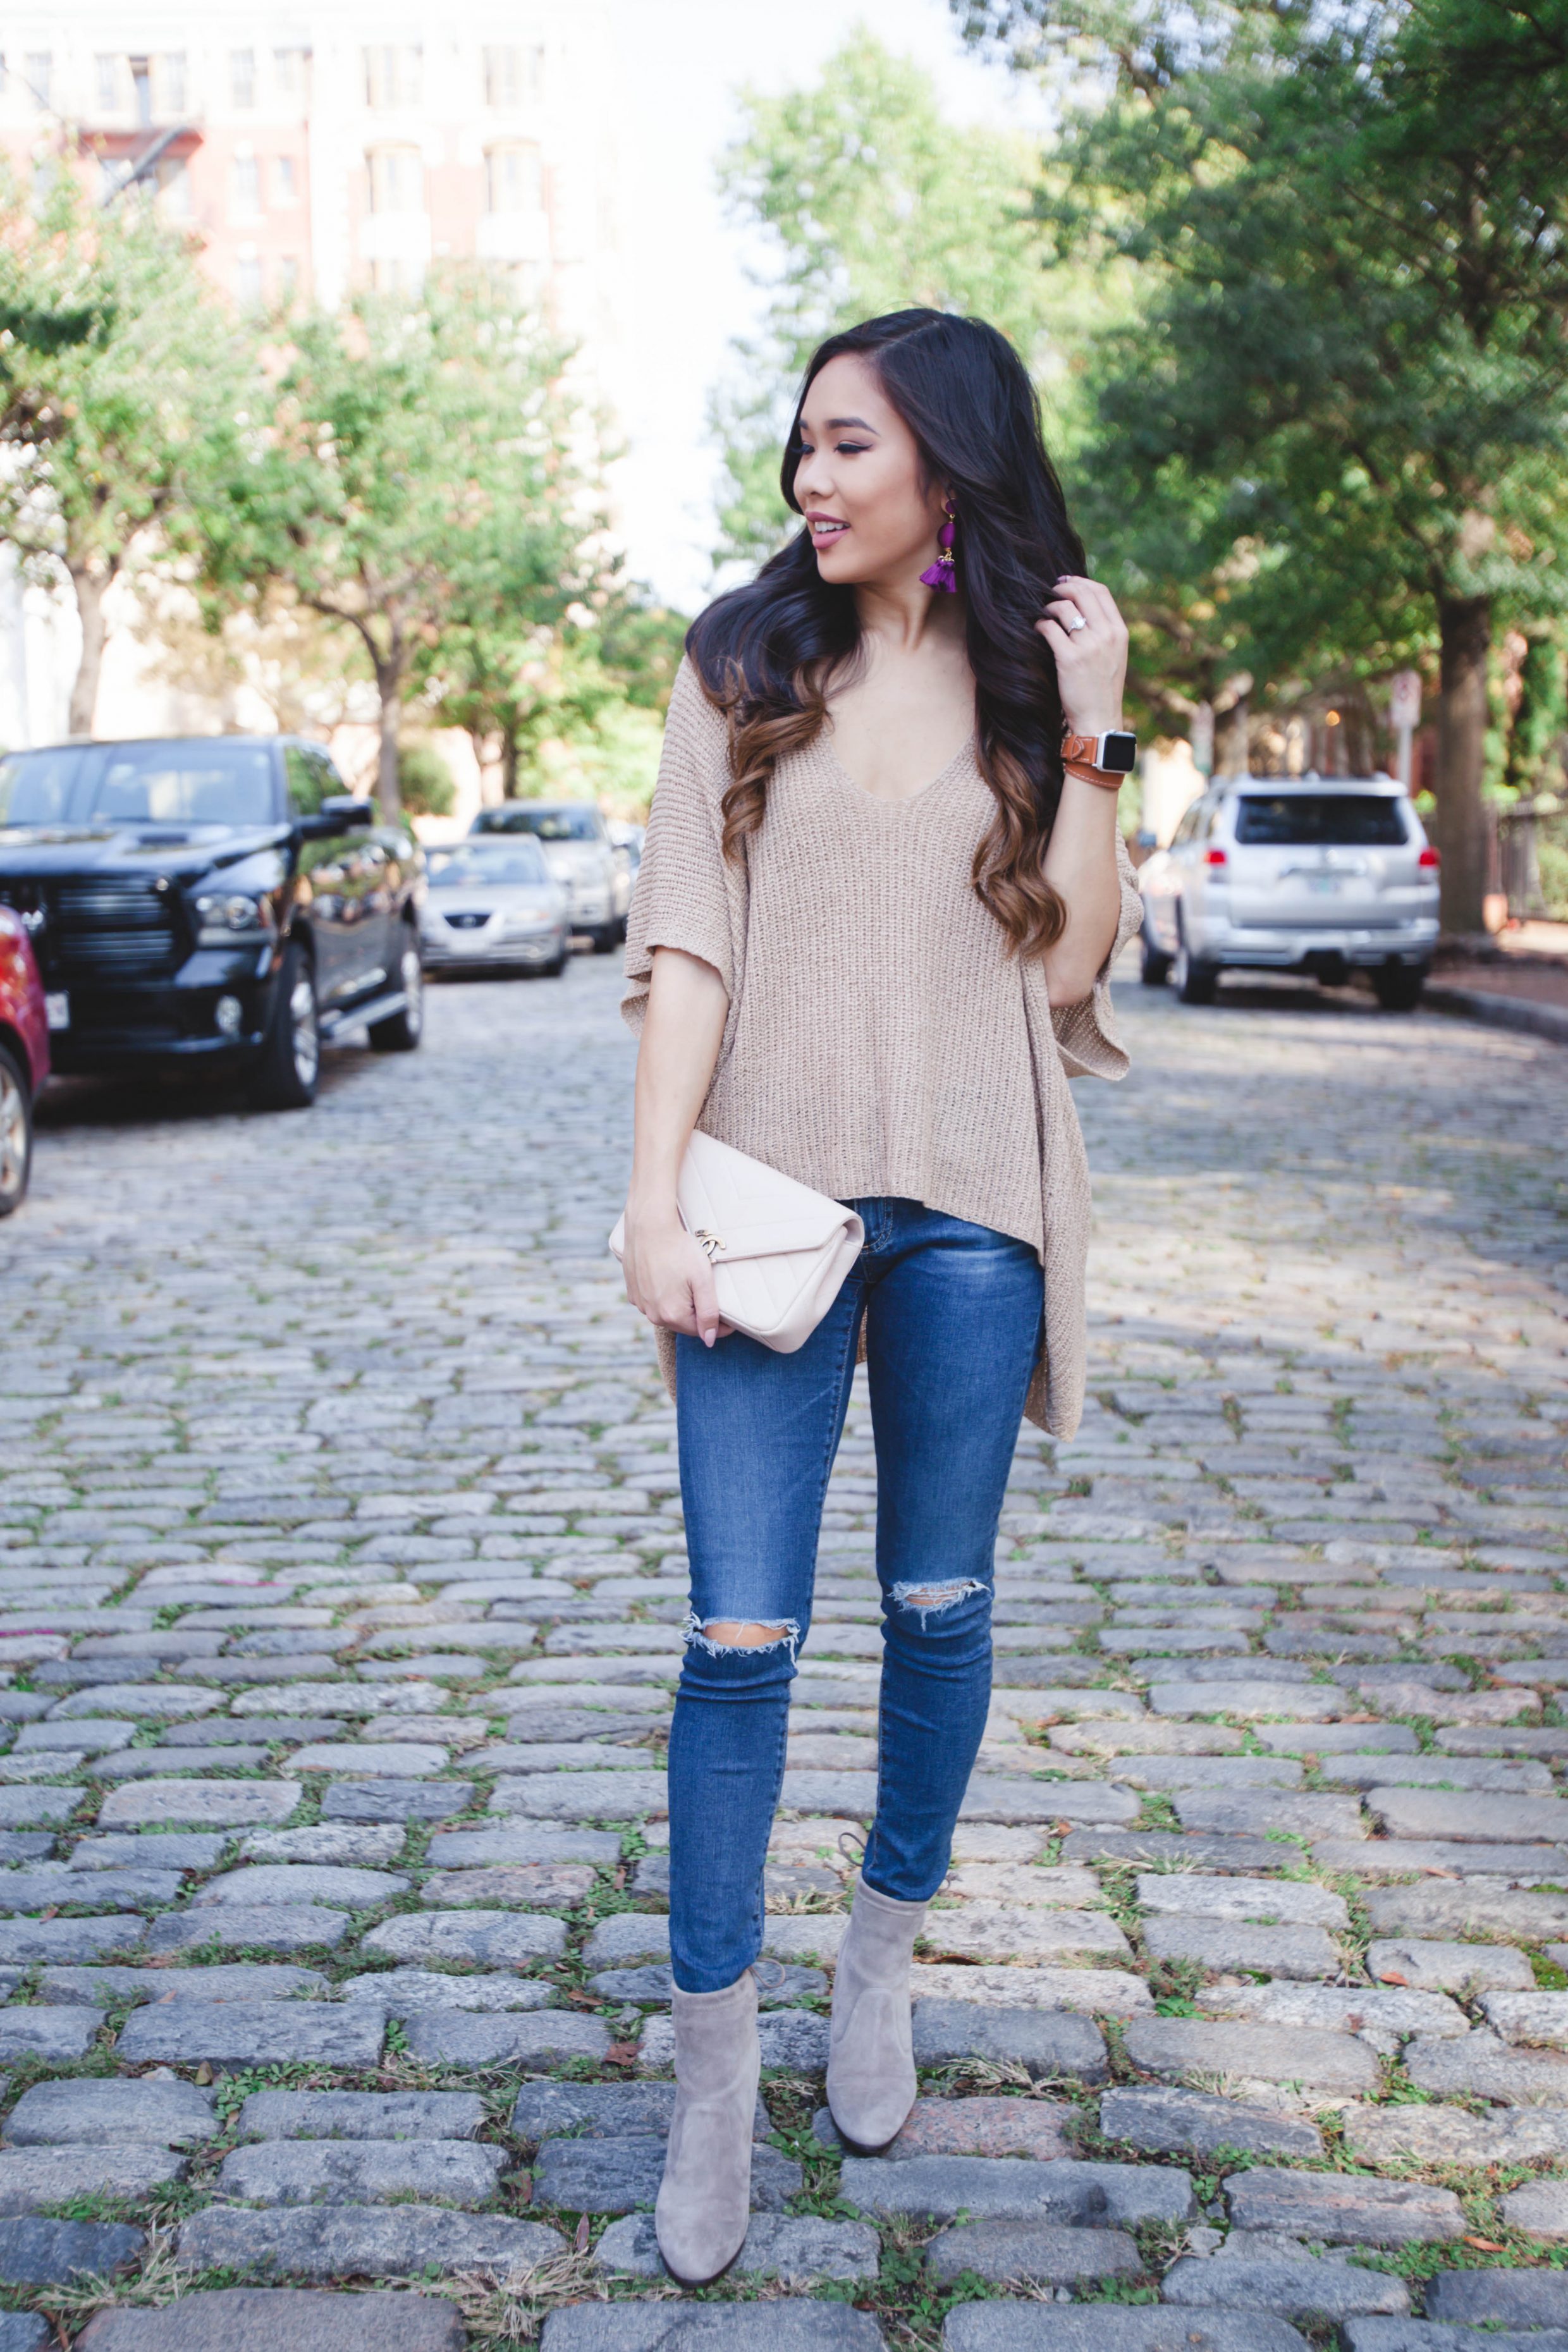 Tan lightweight sweater with plum earrings and Chanel bag